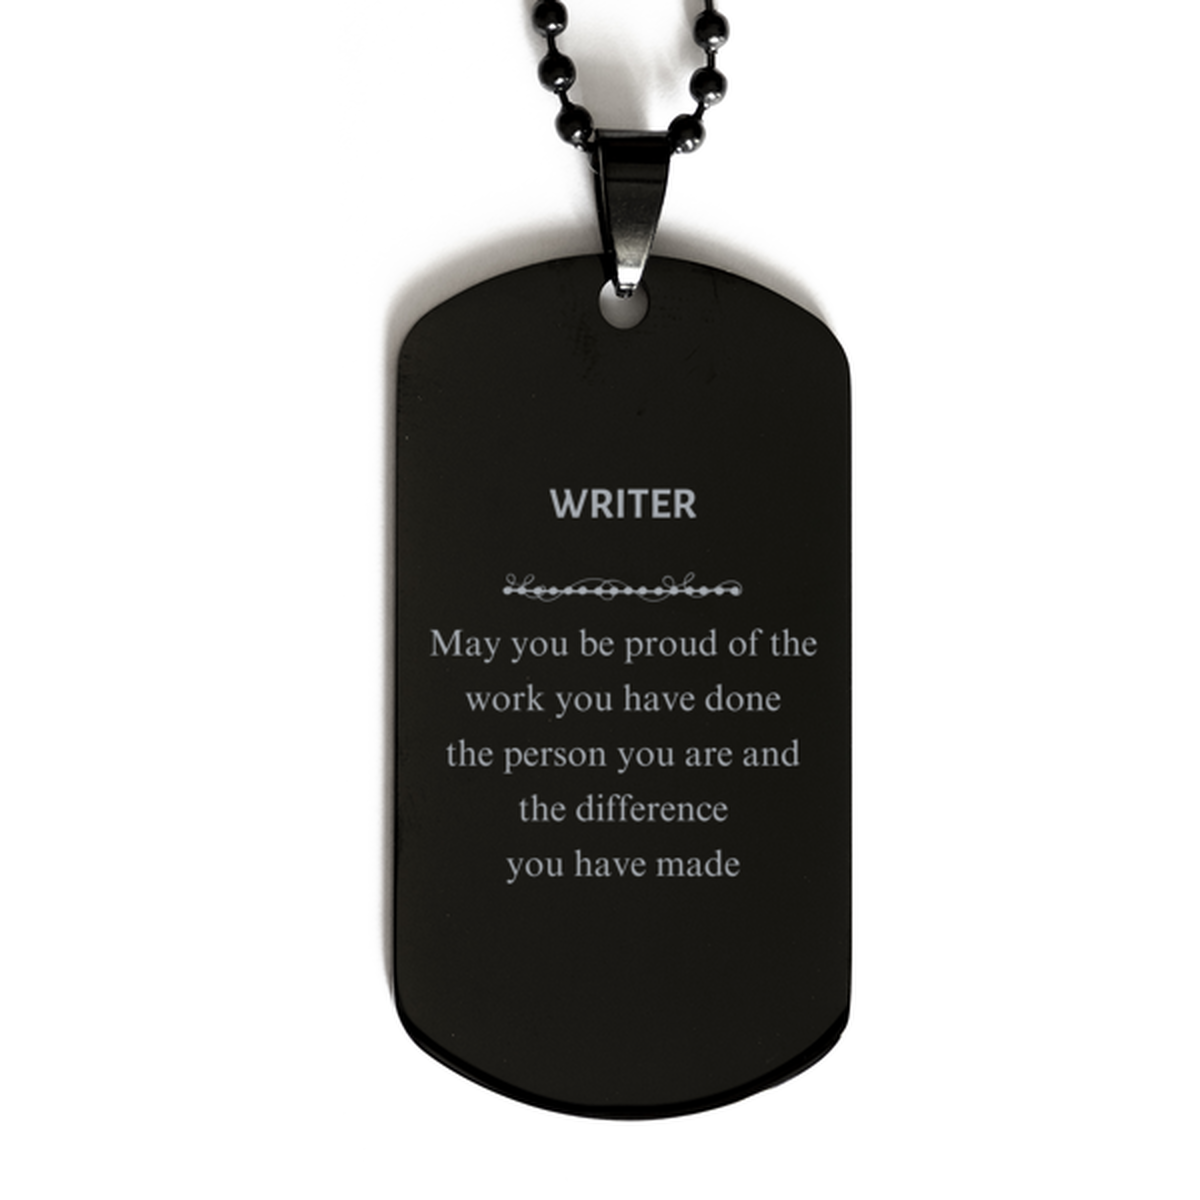 Writer May you be proud of the work you have done, Retirement Writer Black Dog Tag for Colleague Appreciation Gifts Amazing for Writer